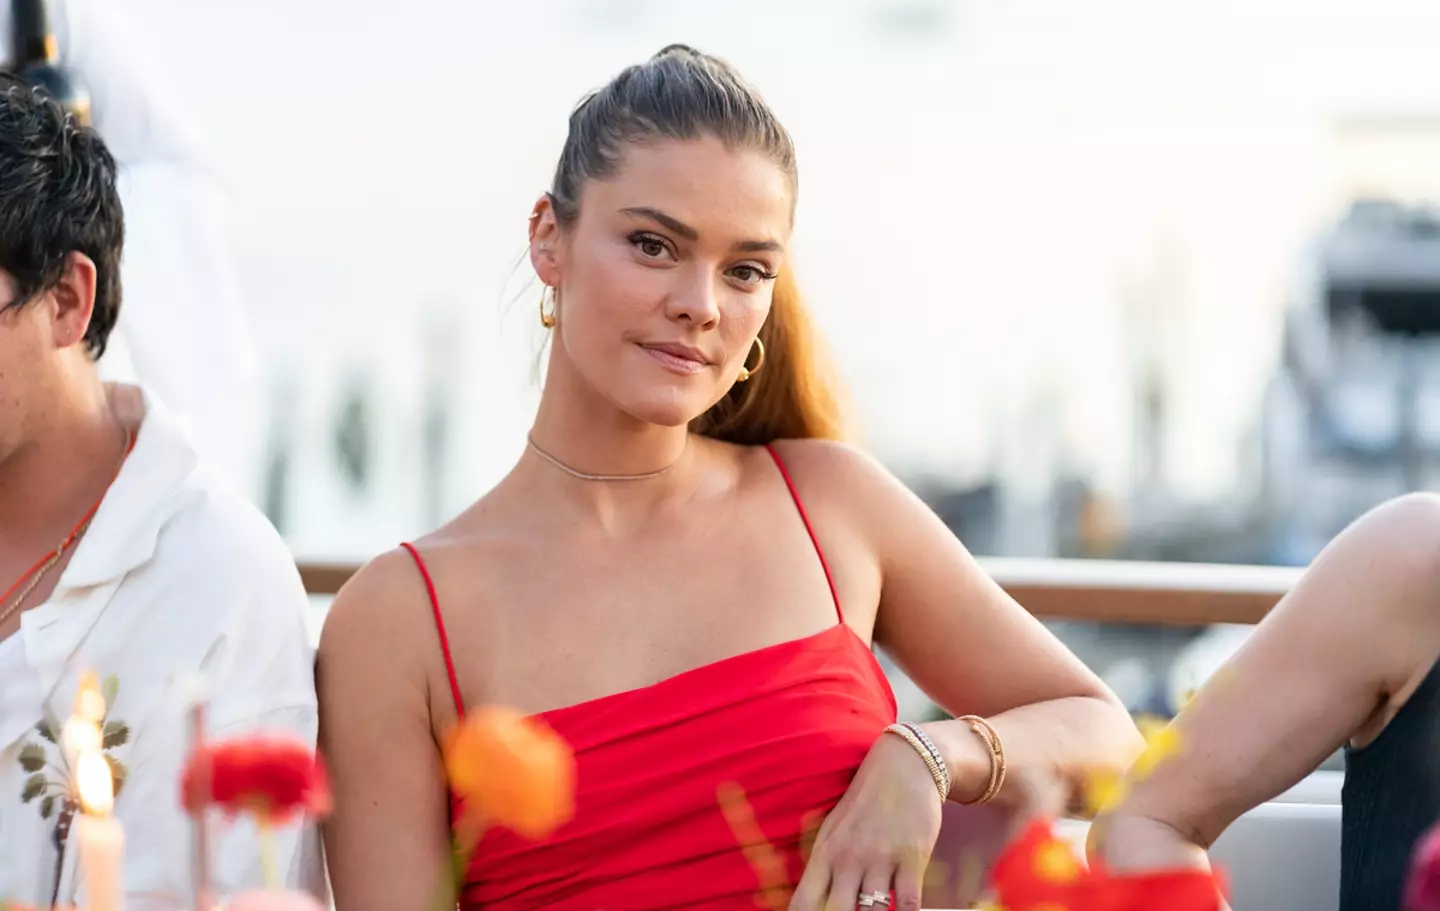 Many have accused Danis of harassing Nina Agdal on social media.